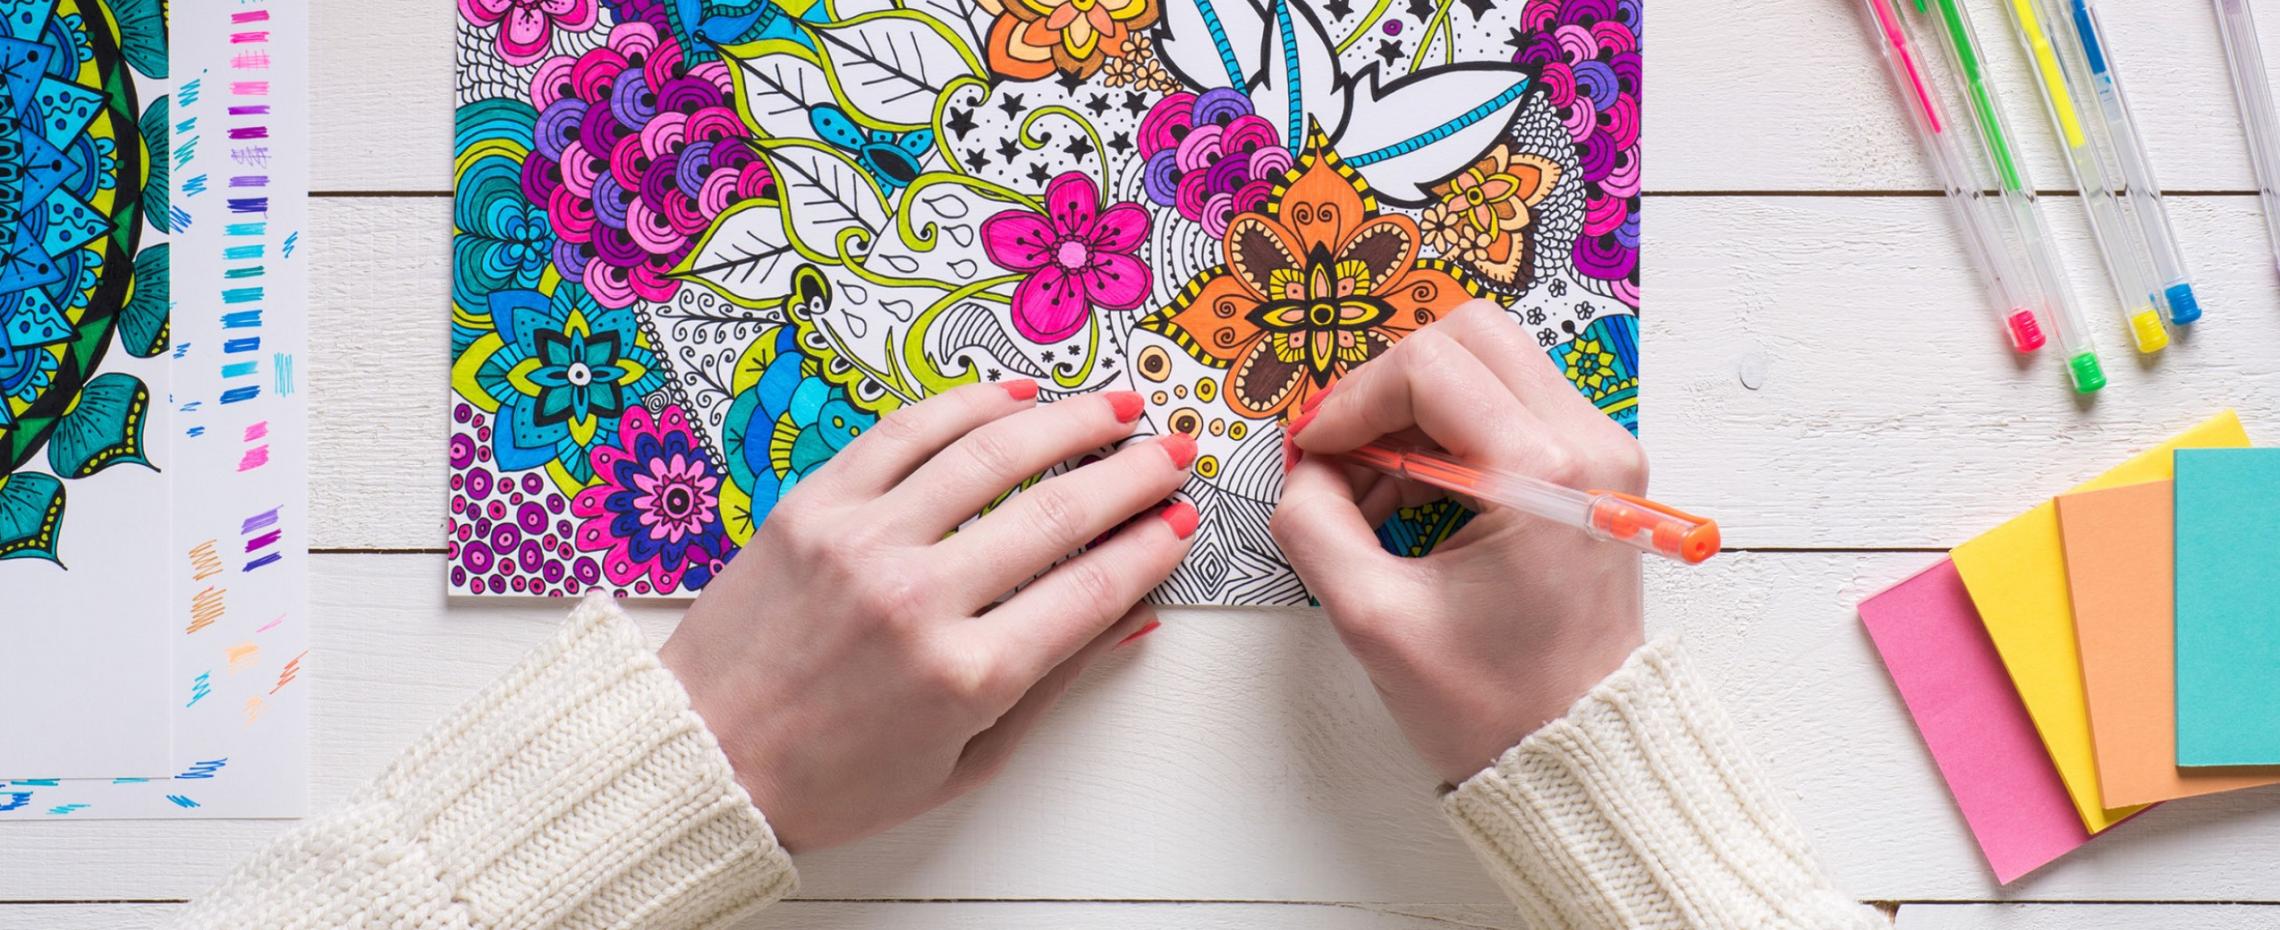 A decorative image of hands coloring a mandala coloring page. The image includes small stacks of paper and coloring pens.